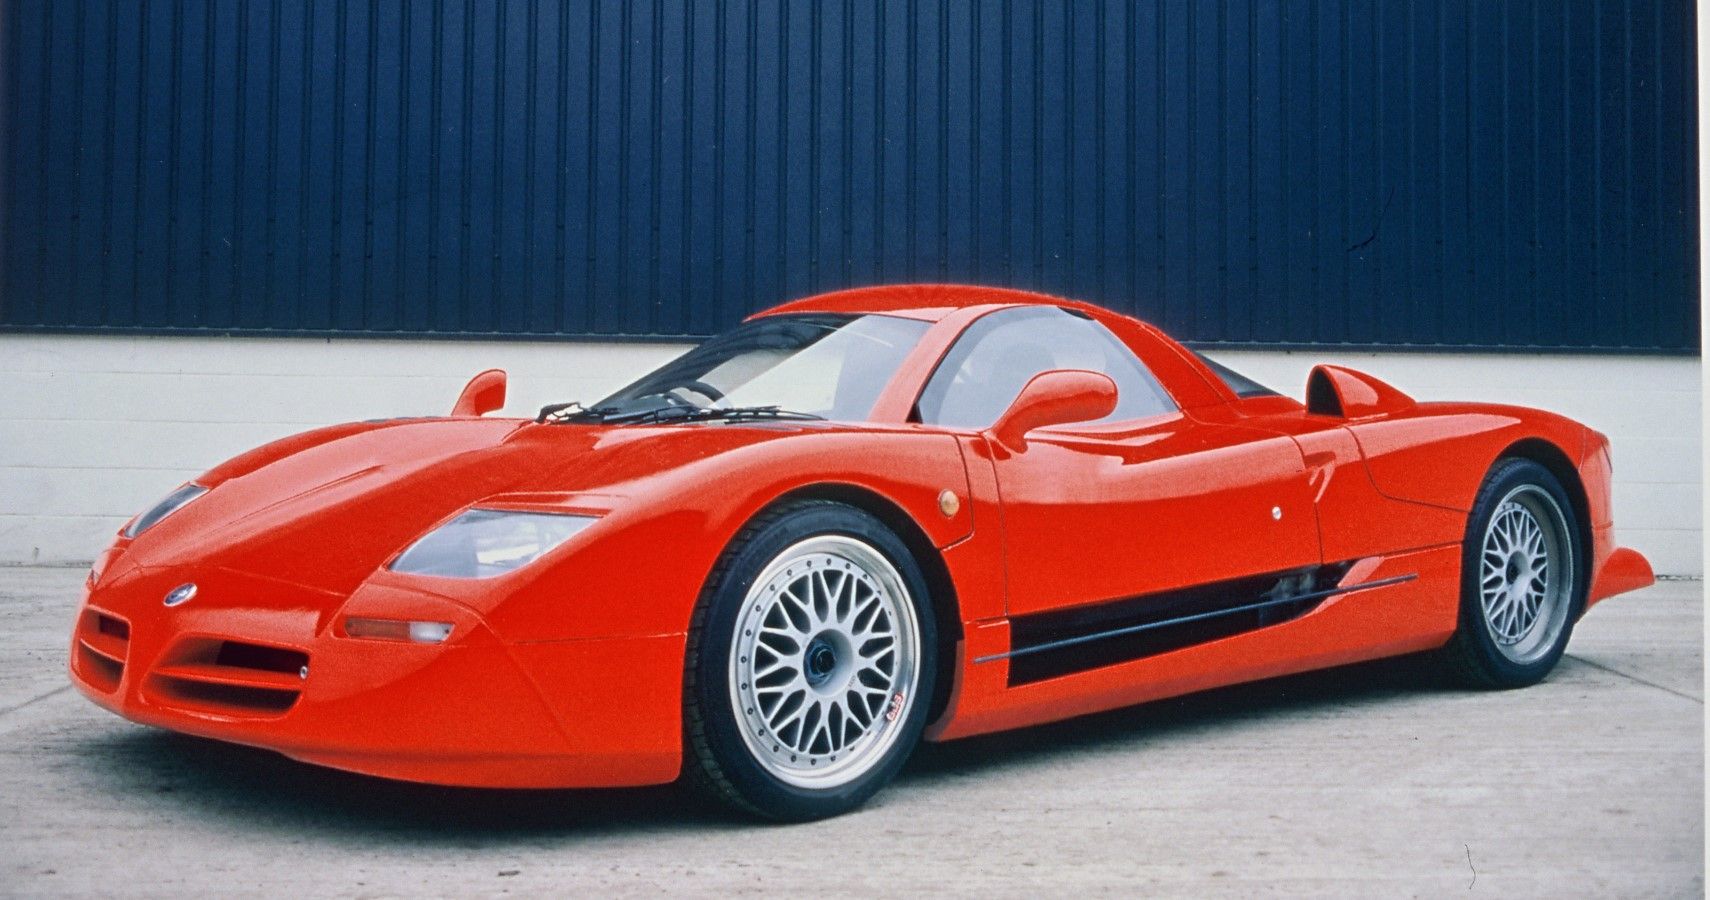 Nissan R390 GT1 in red front third quarter view